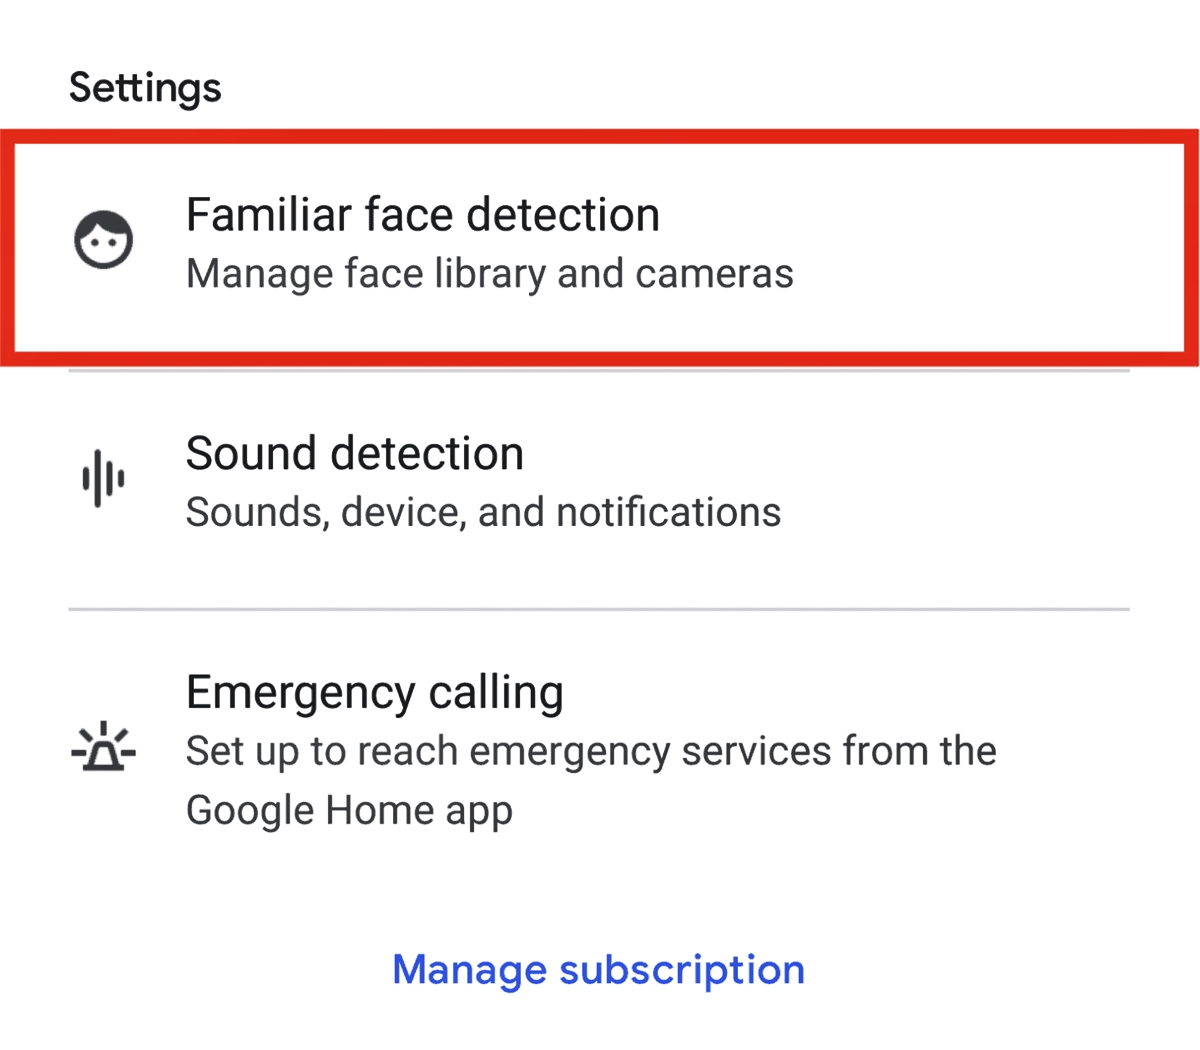 How To Set Up Familiar Faces On Google Home